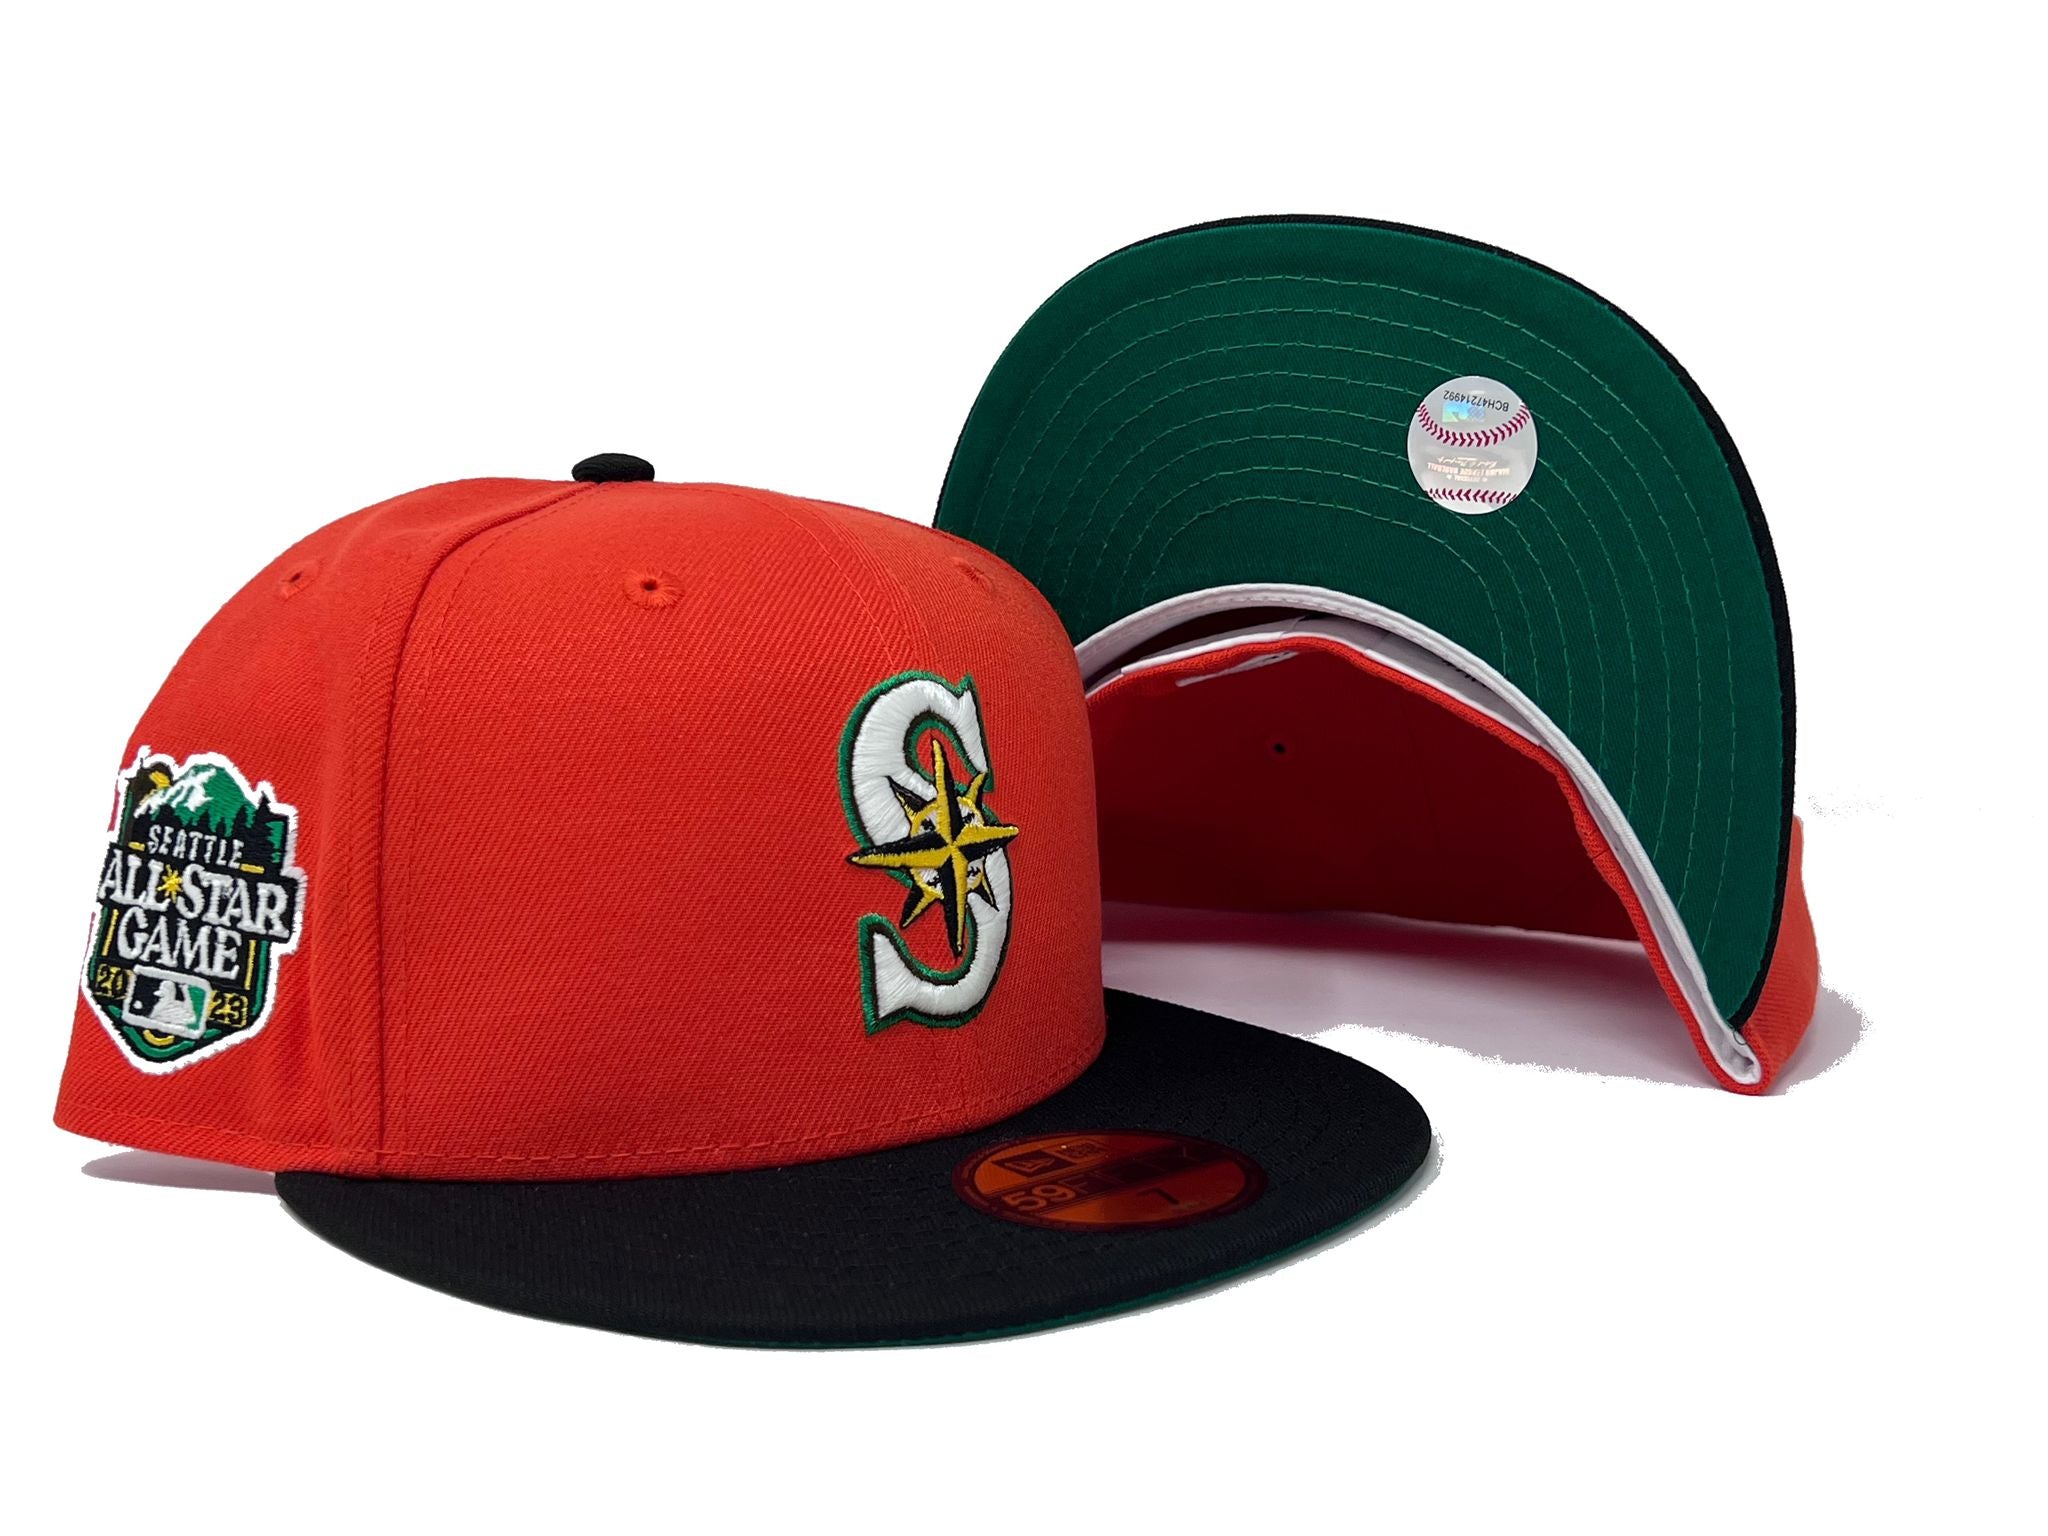 MLB All-Star hats, shirts available now: Where to buy on-field All-Star gear  